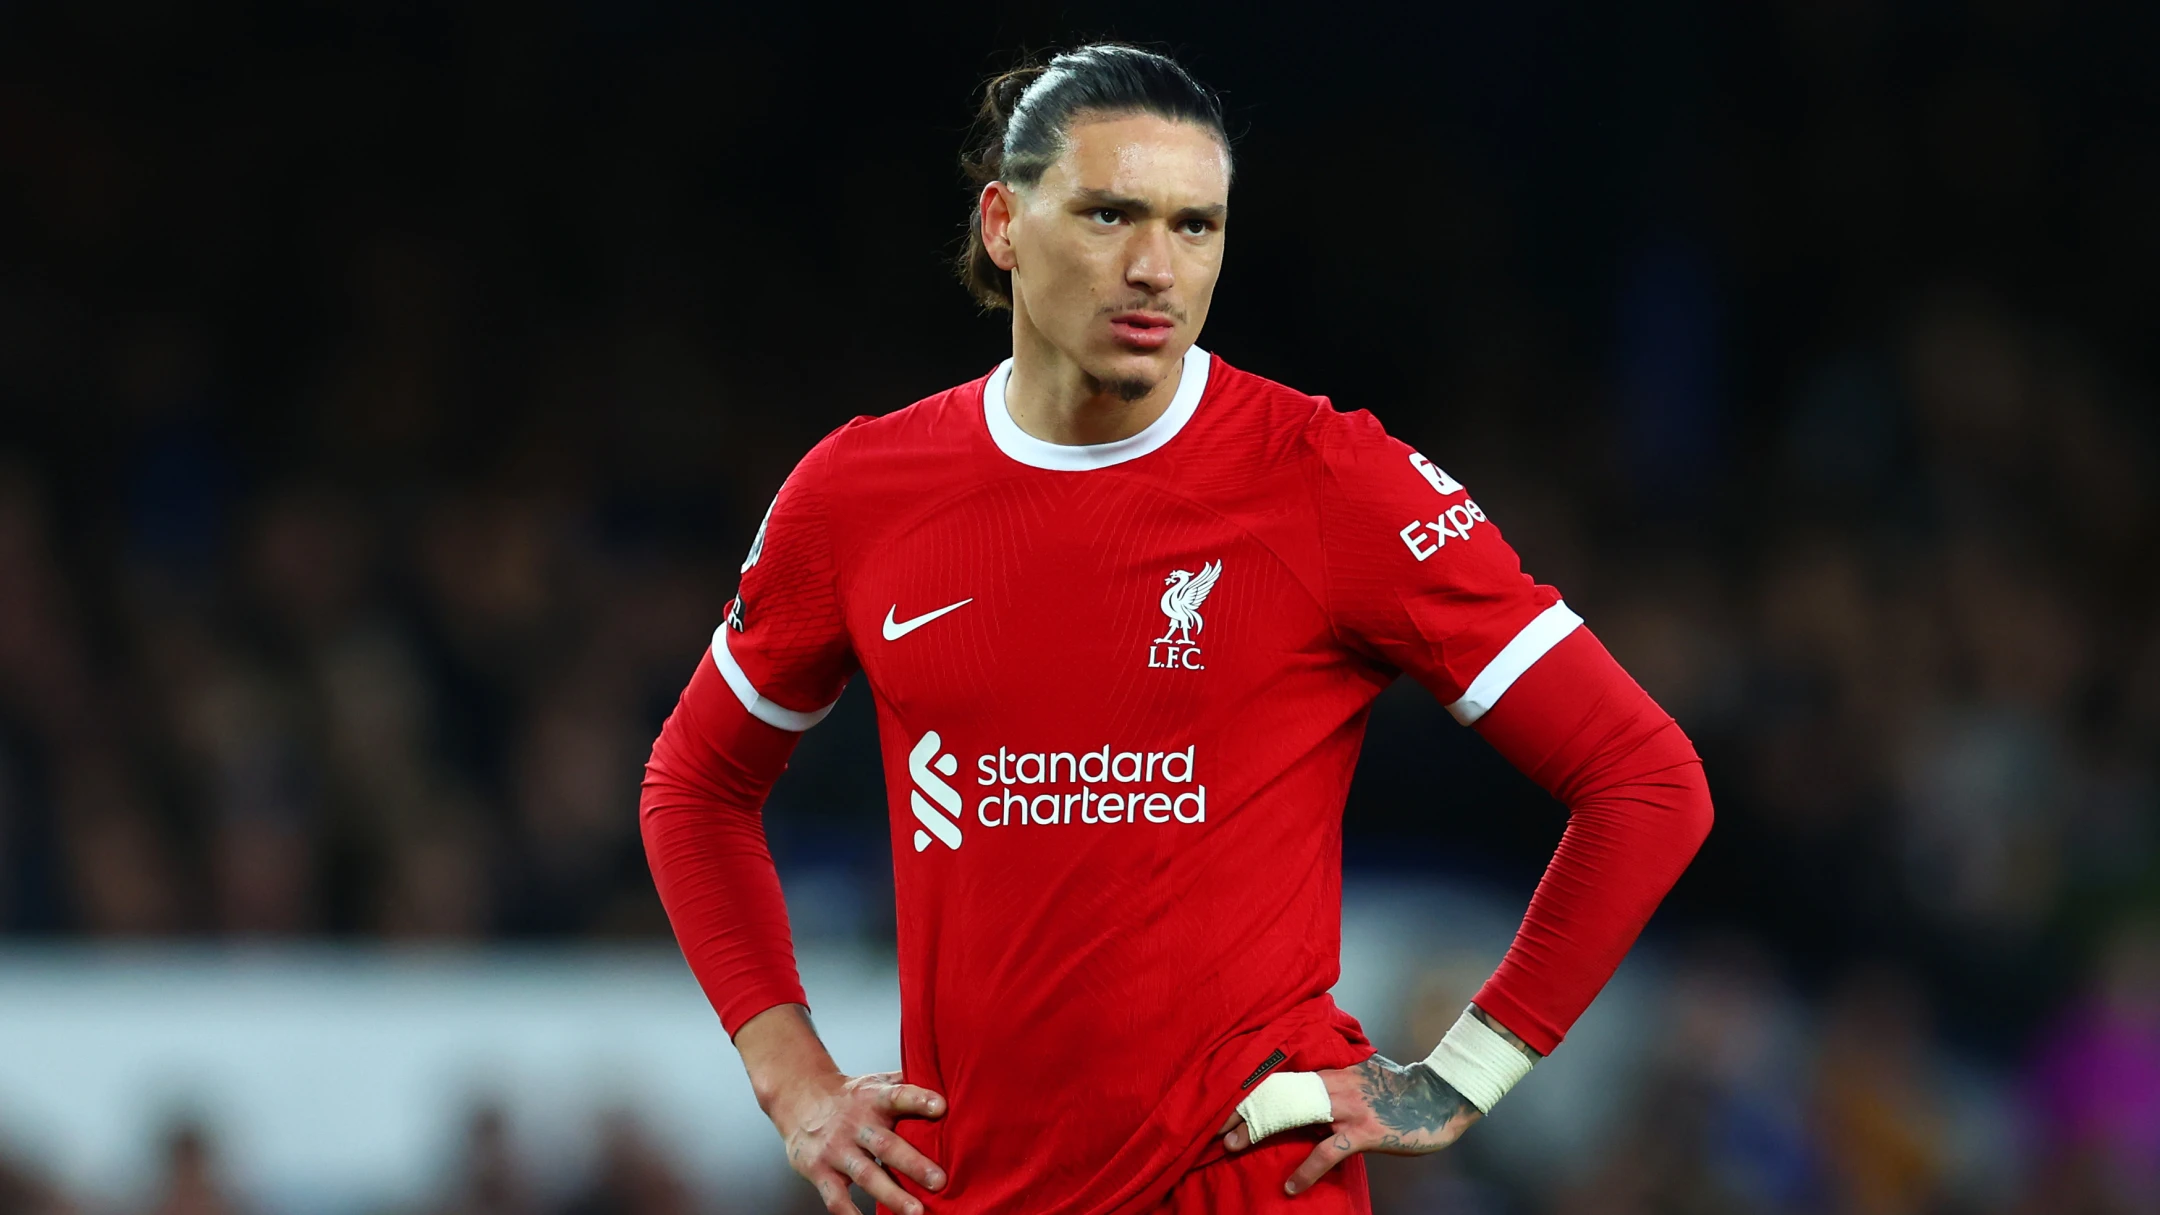 Darwin Nunez no longer looks at comments on social media Forward deleted all Liverpool content from his Instagram “Whoever says negative comments do not affect them is lying”